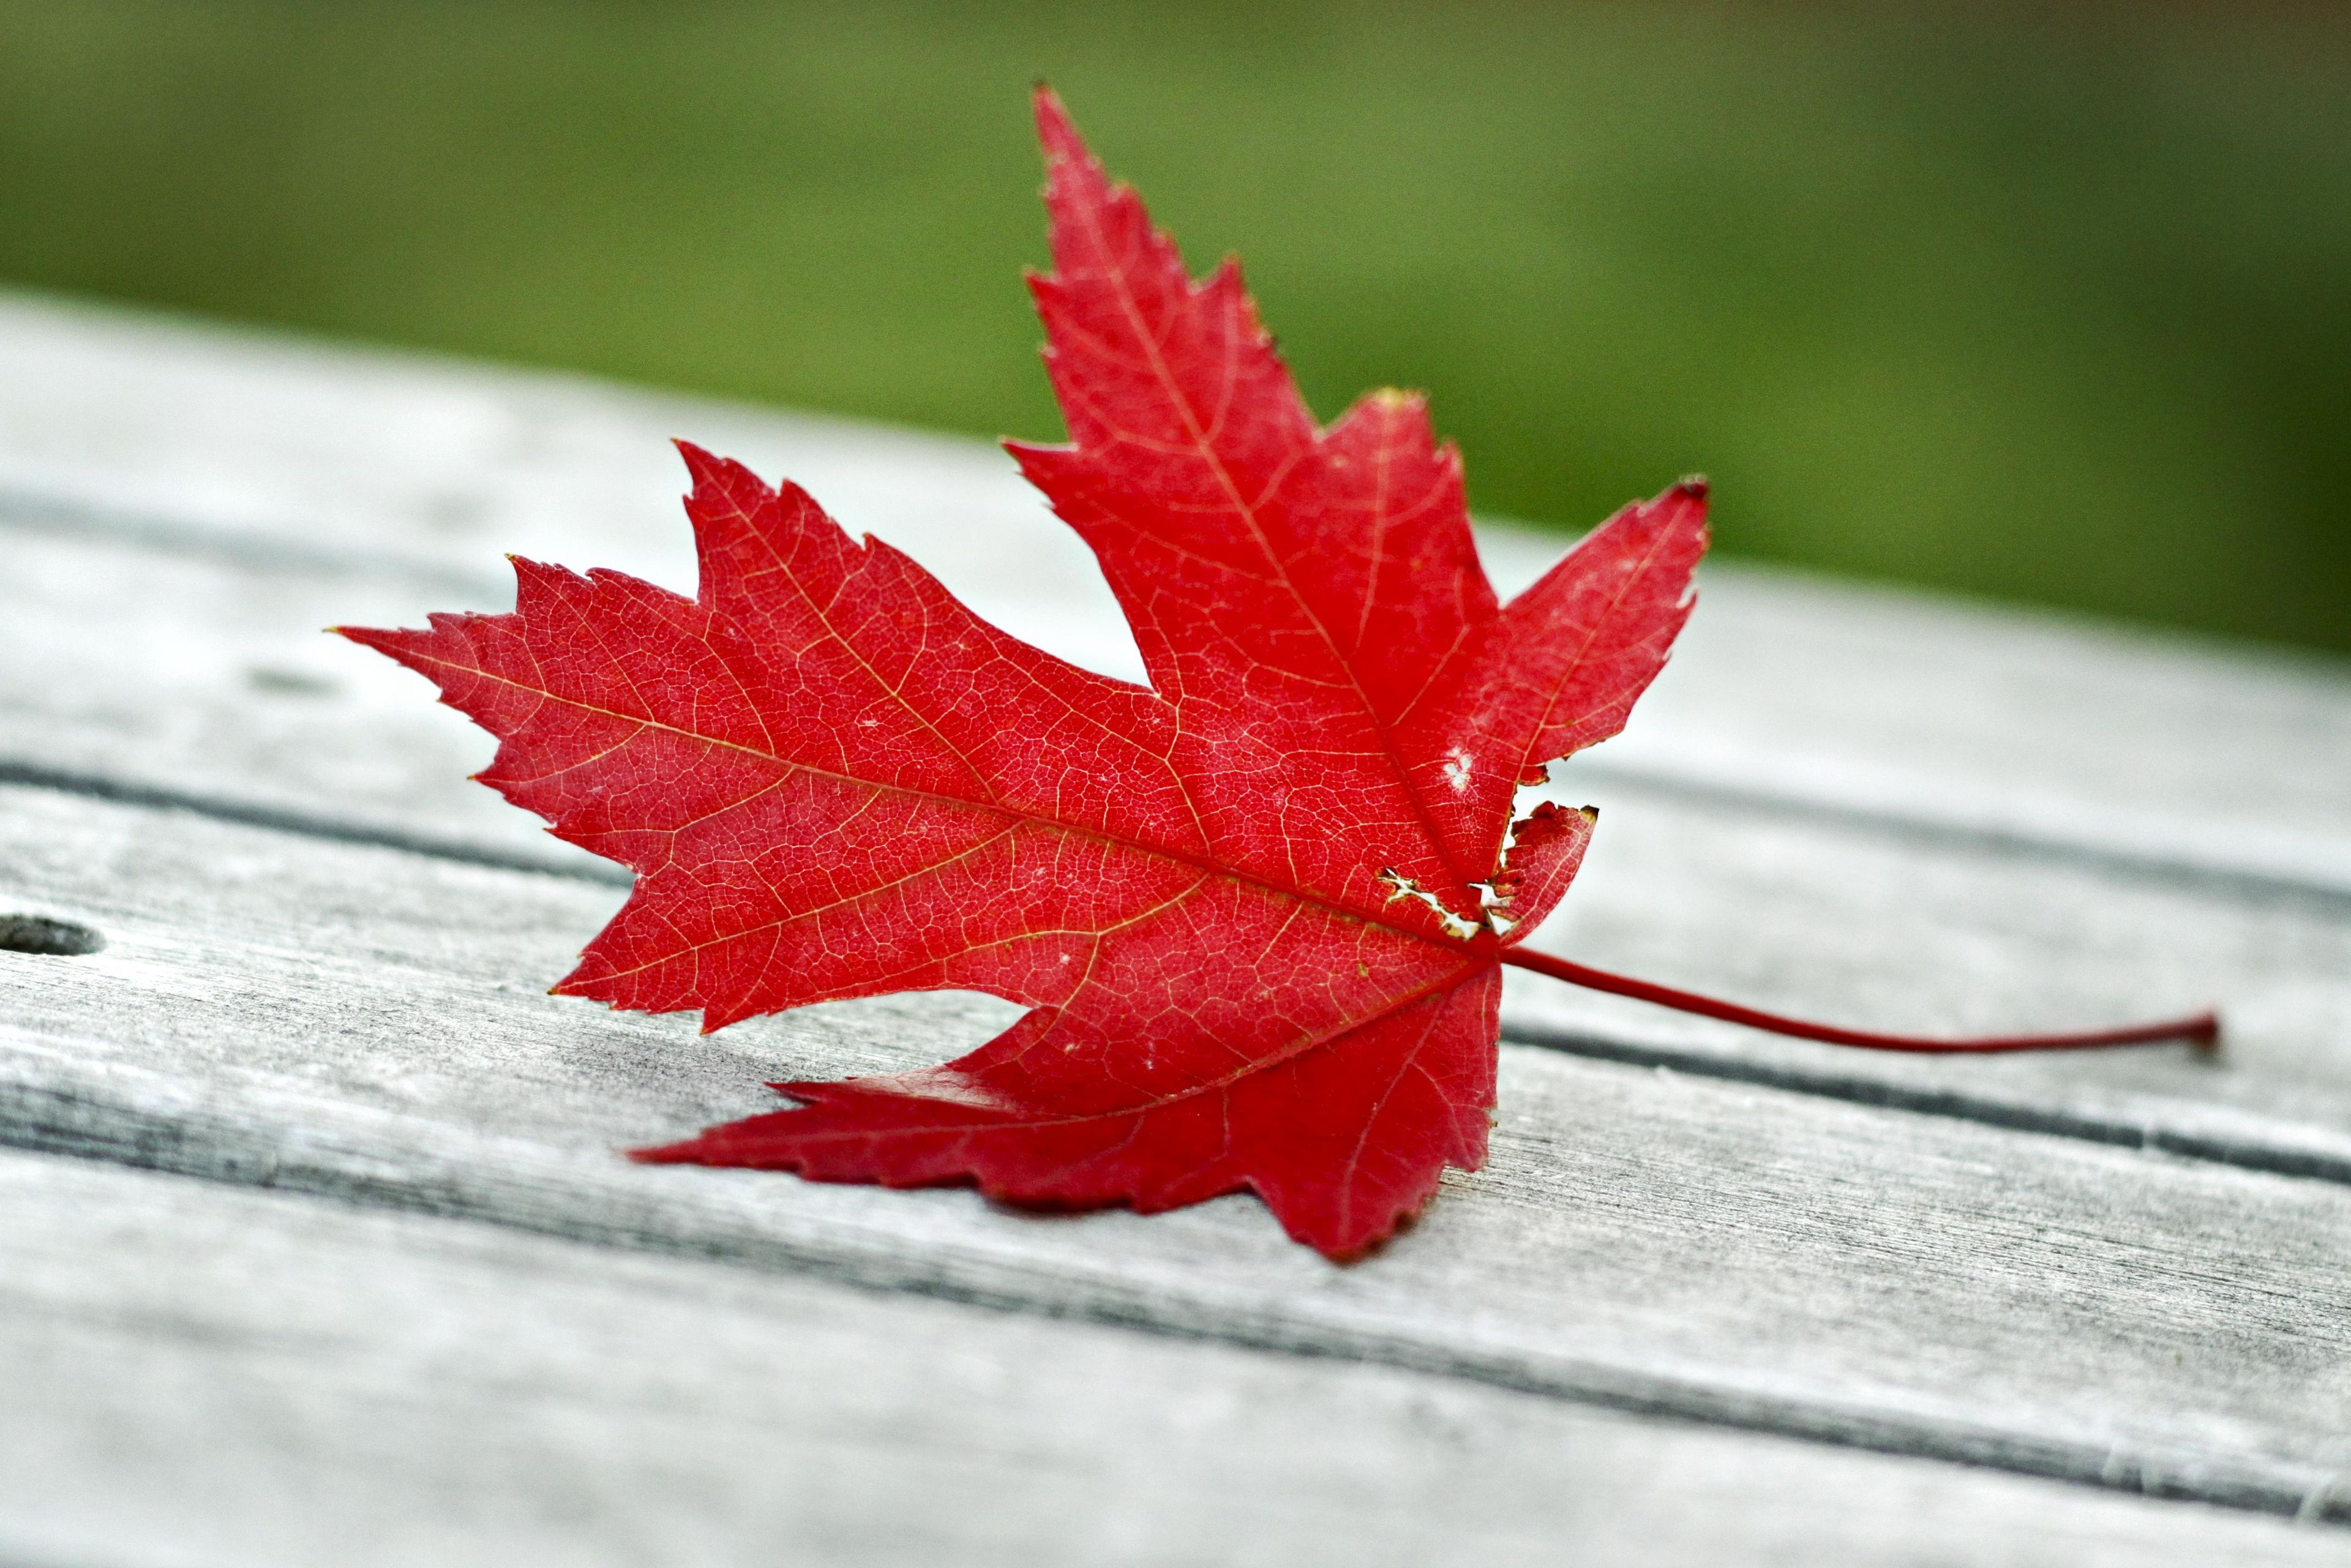 A red leaf that has fallen on a wooden deck.